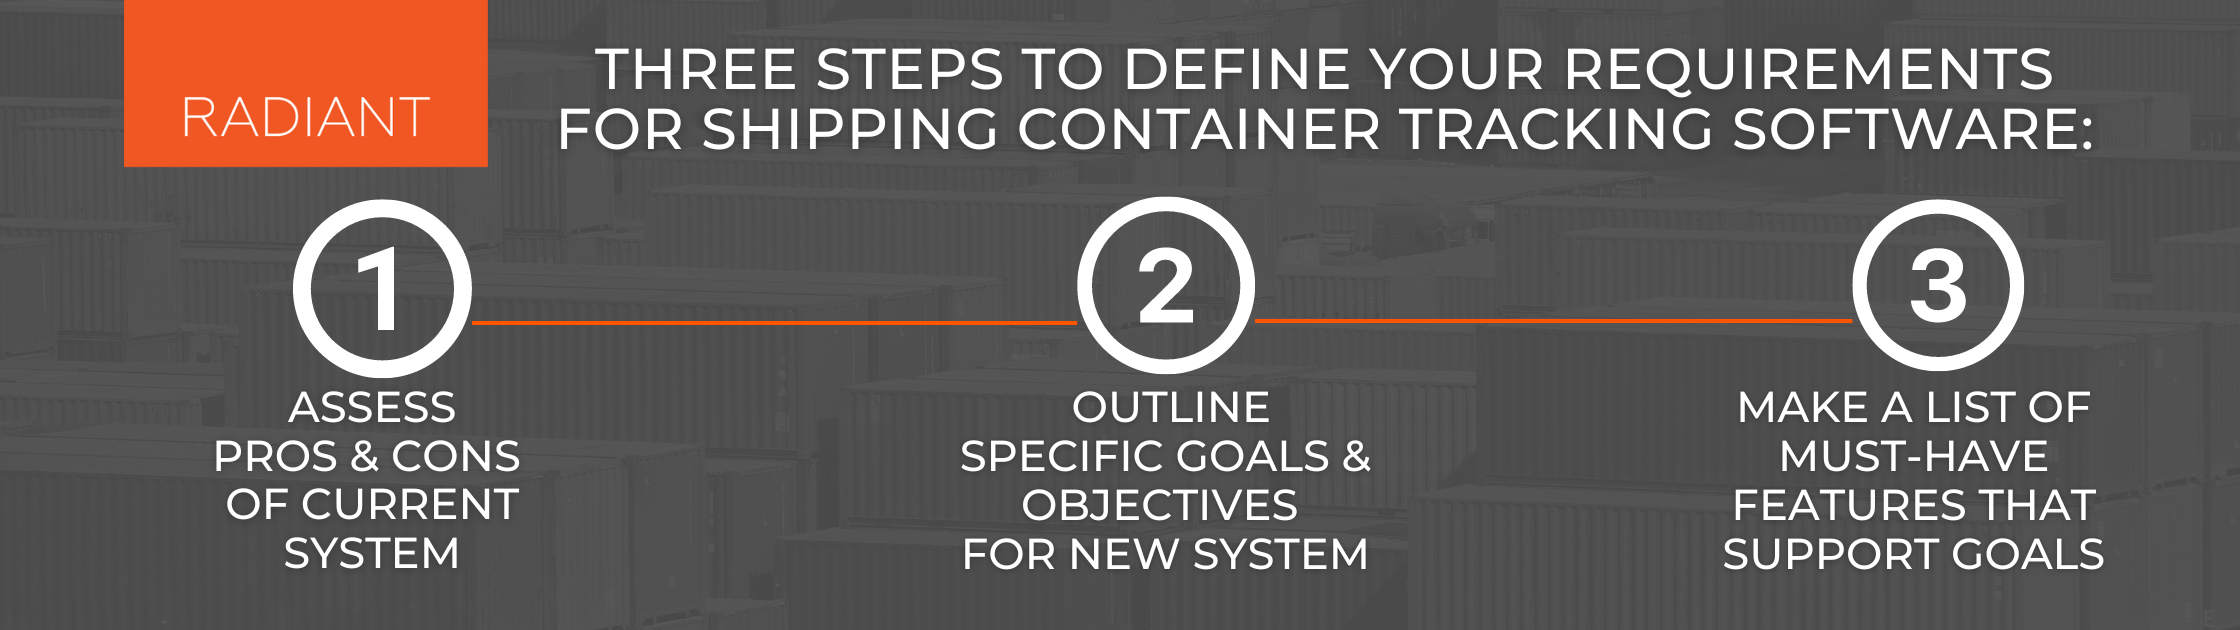 Best Container Tracking Software - Ocean Container Tracking Software - Container Tracking Platform - Shipping Container Tracking Solution - Container Tracking Software - Container Management Software - Container Monitoring Software - Shipping Container Tracking - Shipping Container Tracking Software - Shipping Container Tracker - Shipping Container Monitoring - Shipping Container Software